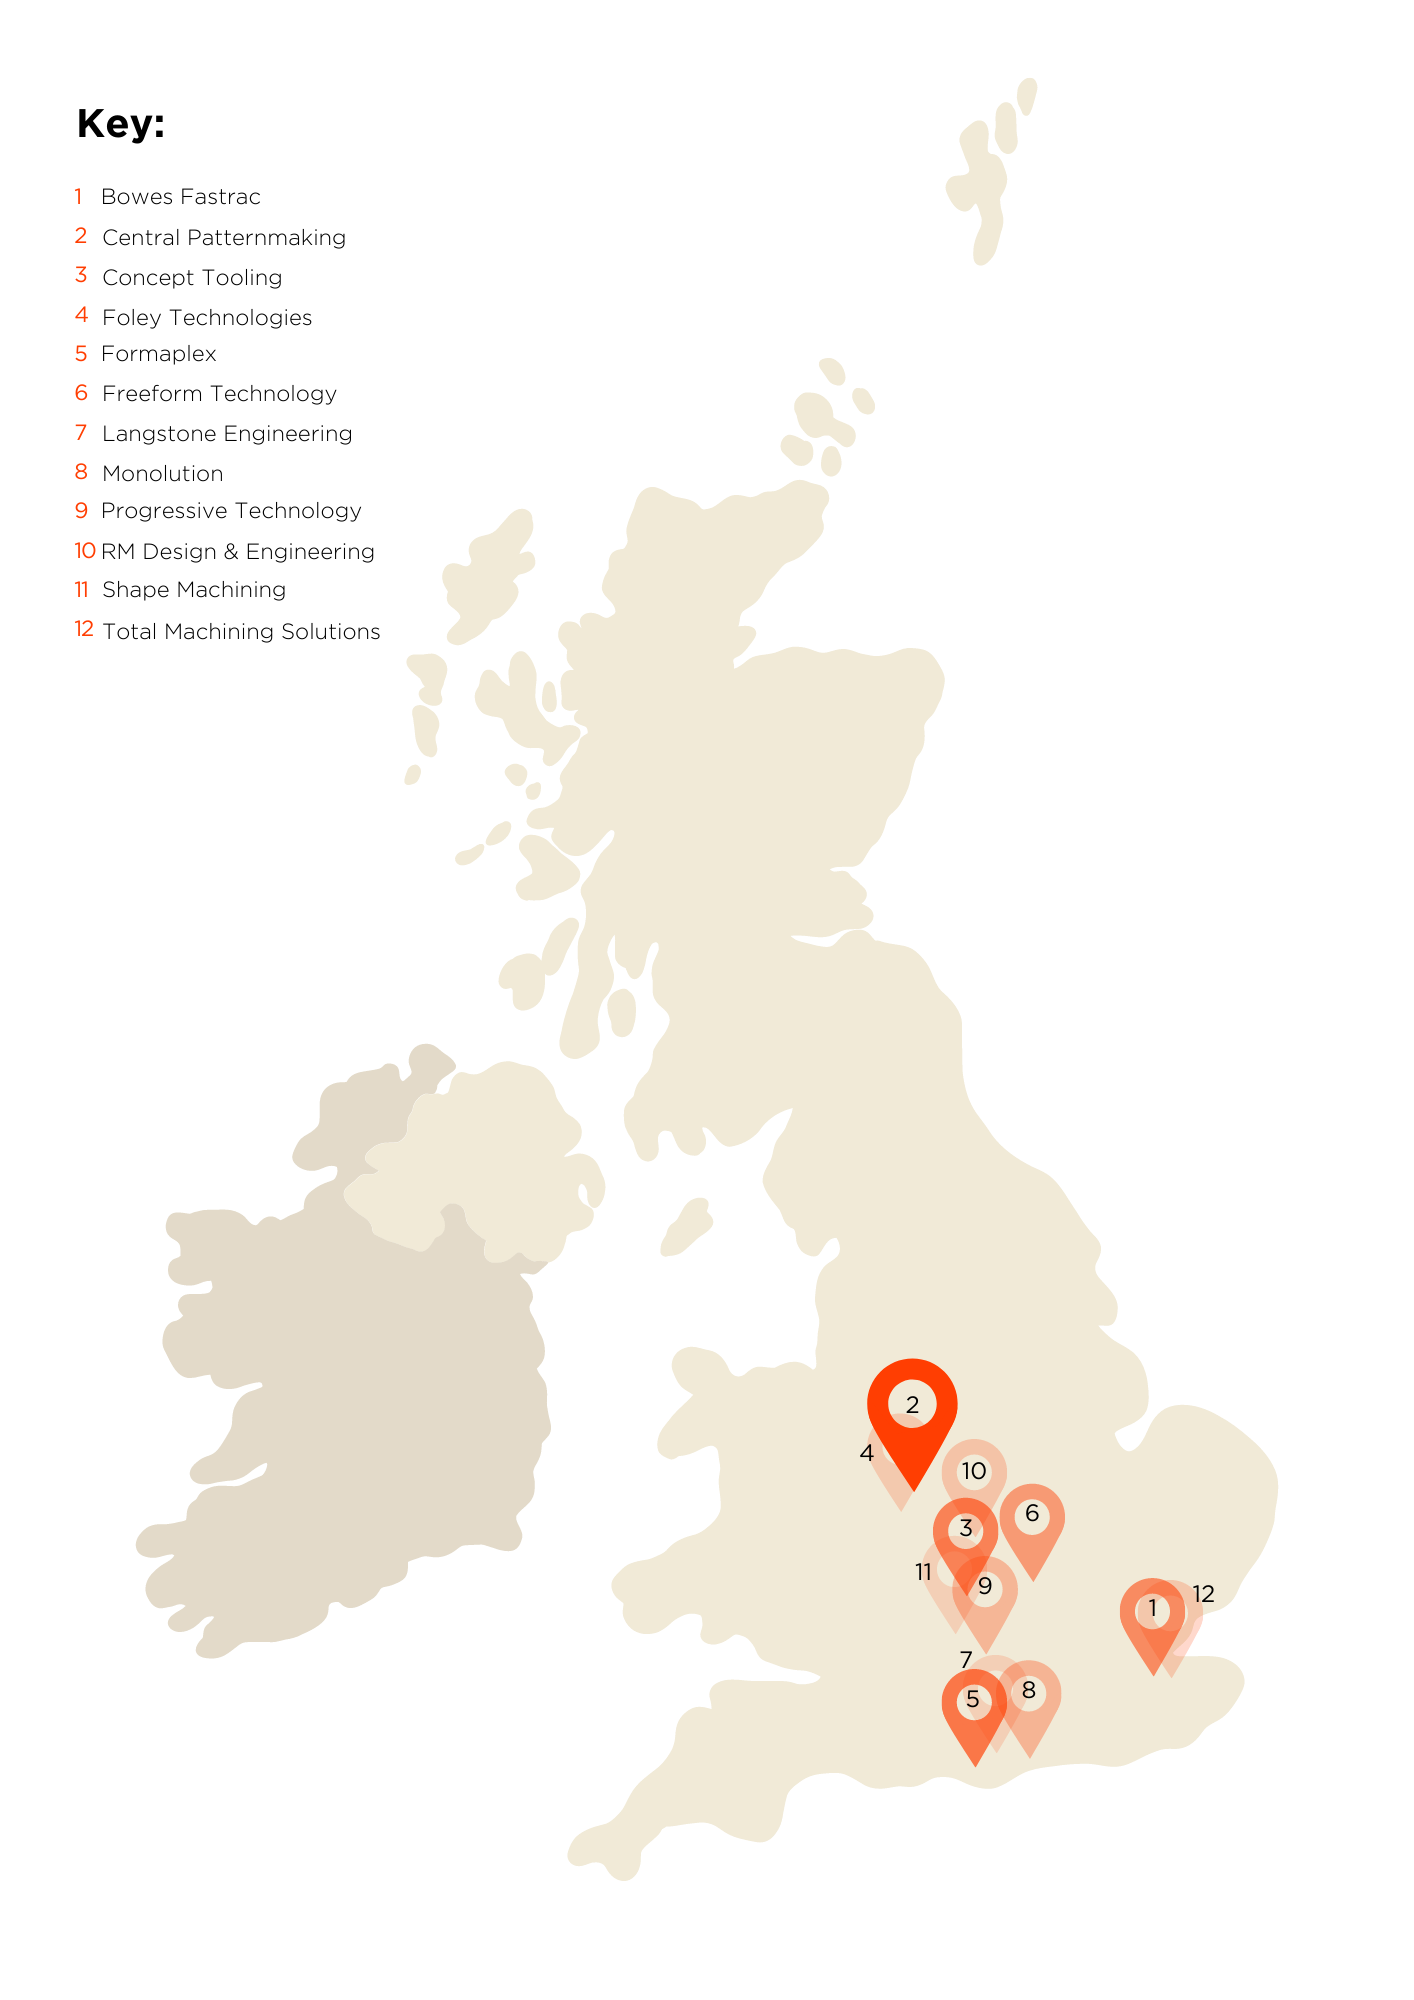 Composite & Motorsport suppliers in the UK map with key